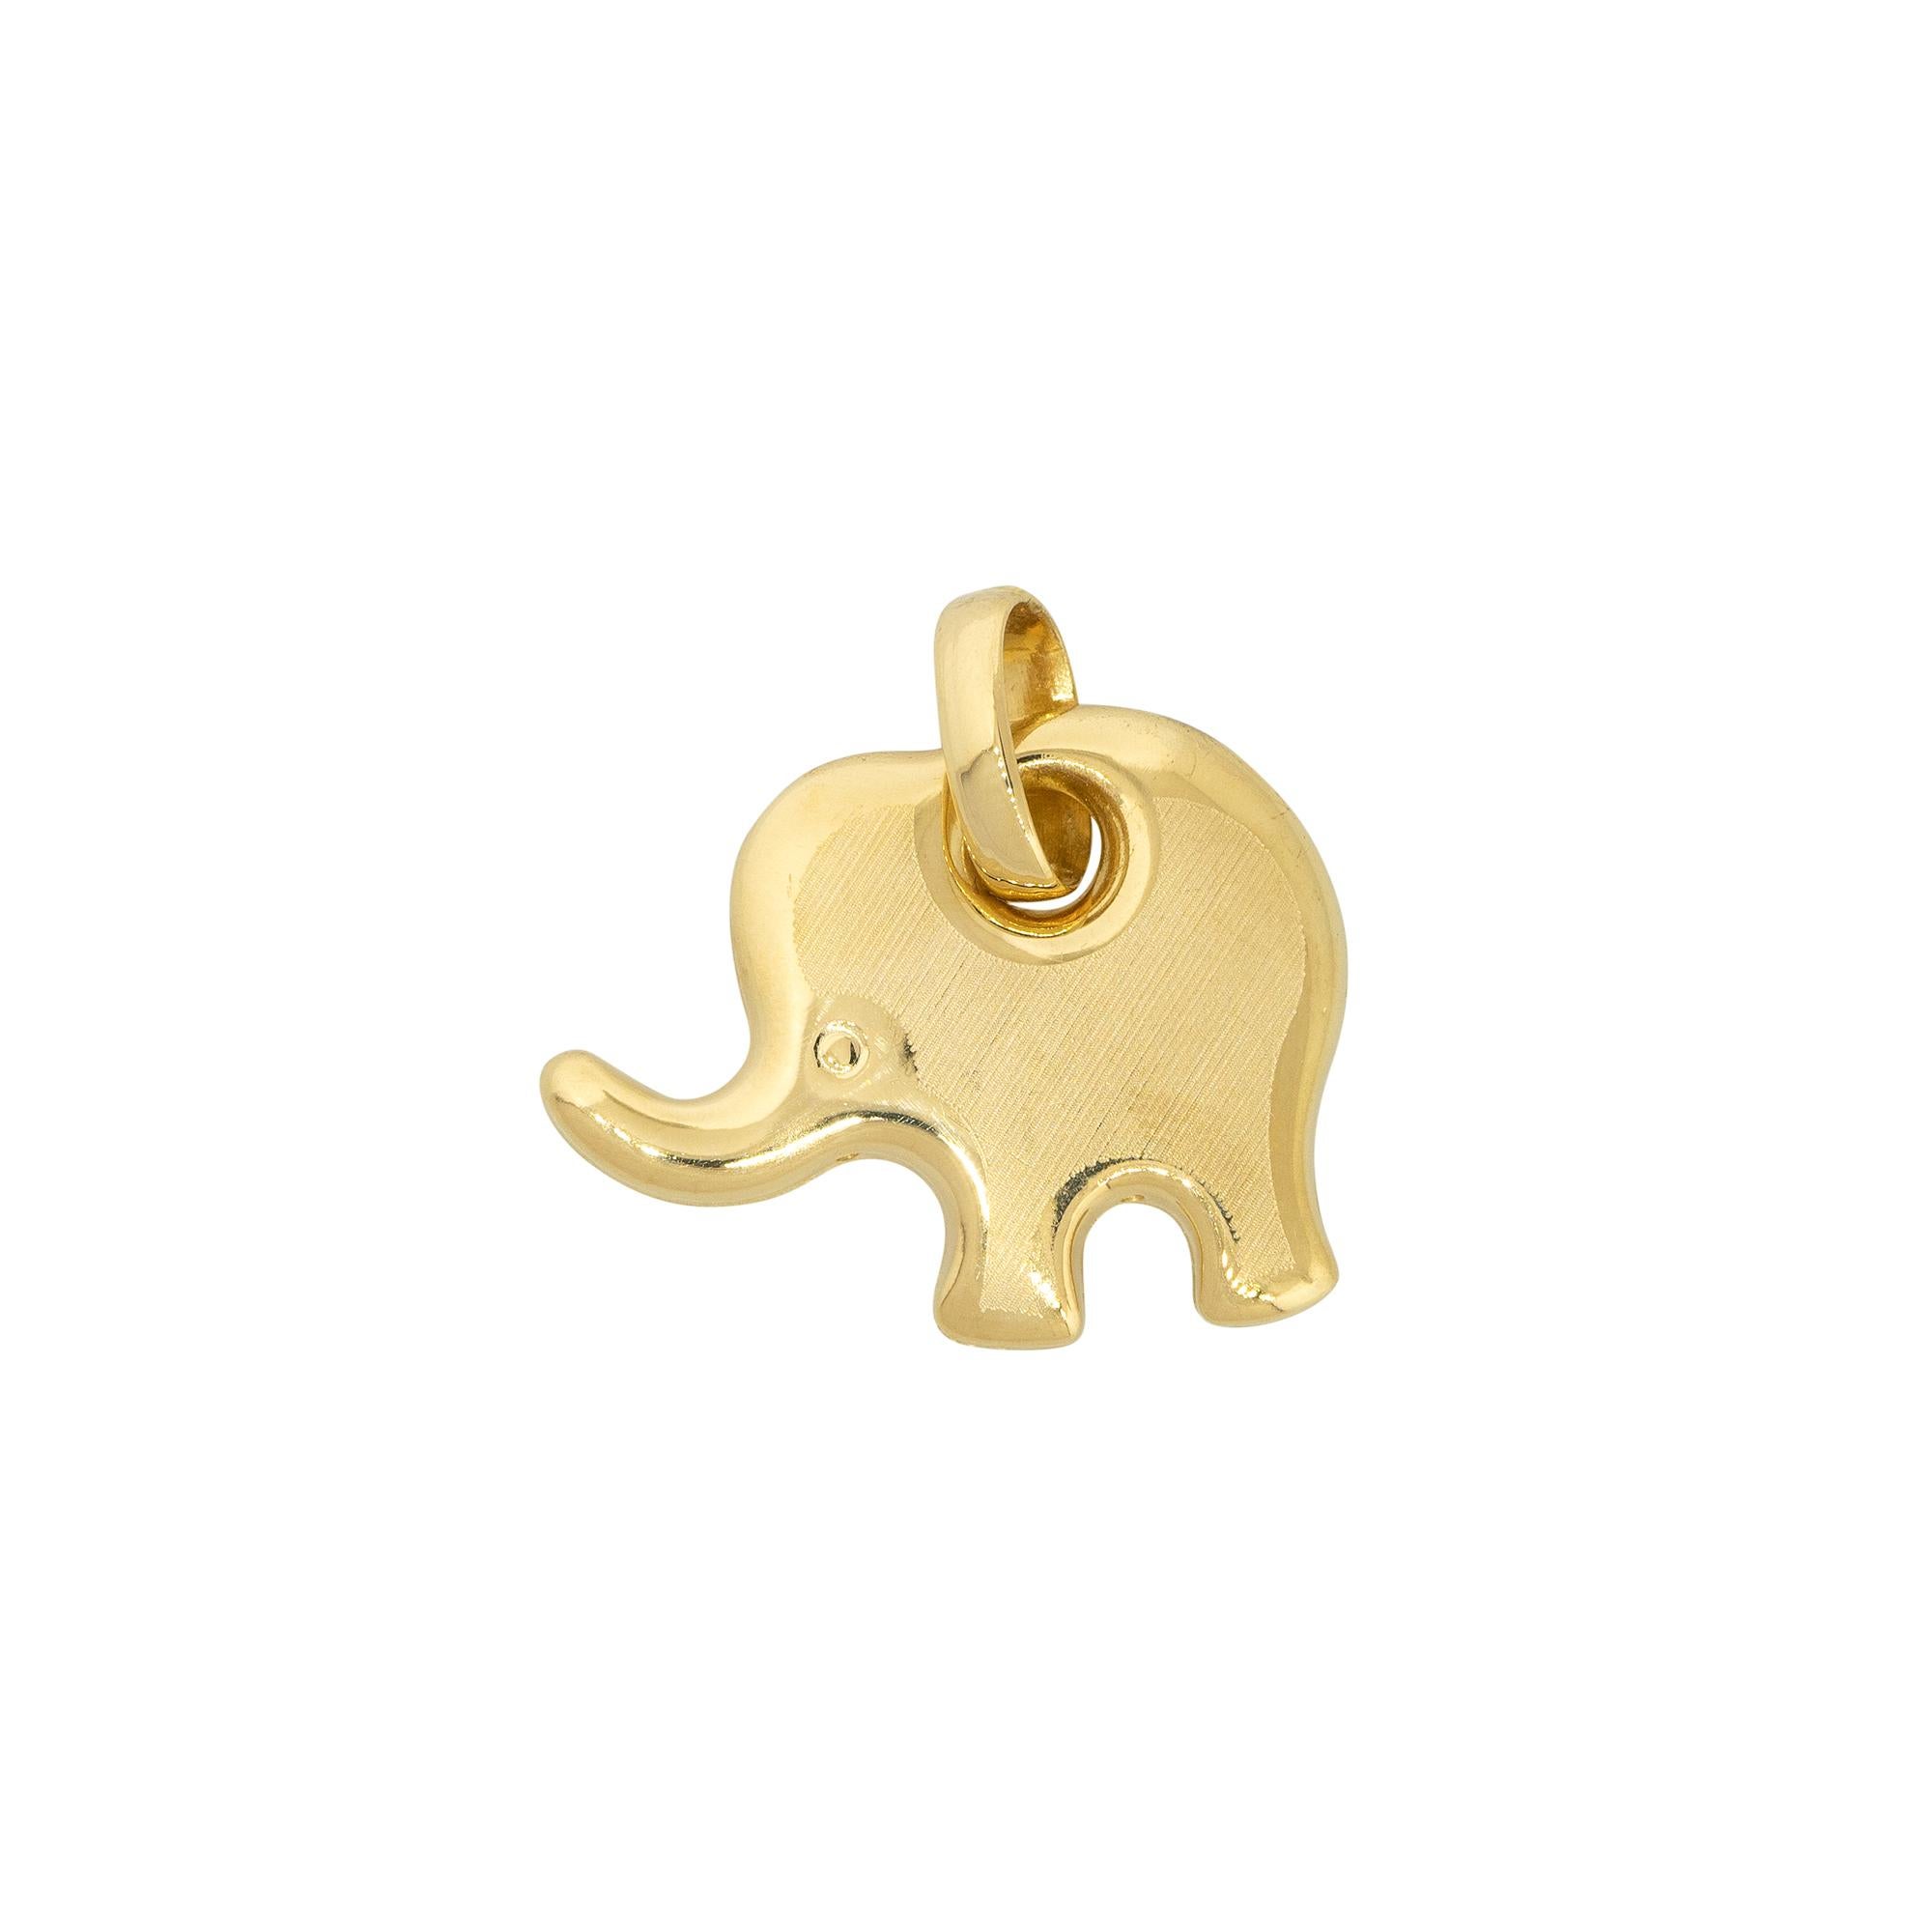 18k Yellow Gold Elephant Pendant

Material: 18k Yellow Gold
Item Weight: 2.4g (1.6dwt)
Item Dimensions: 25.61mm x 4.03mm x 20.07mm
Additional Details: This item also comes with a presentation box!
SKU: G12852